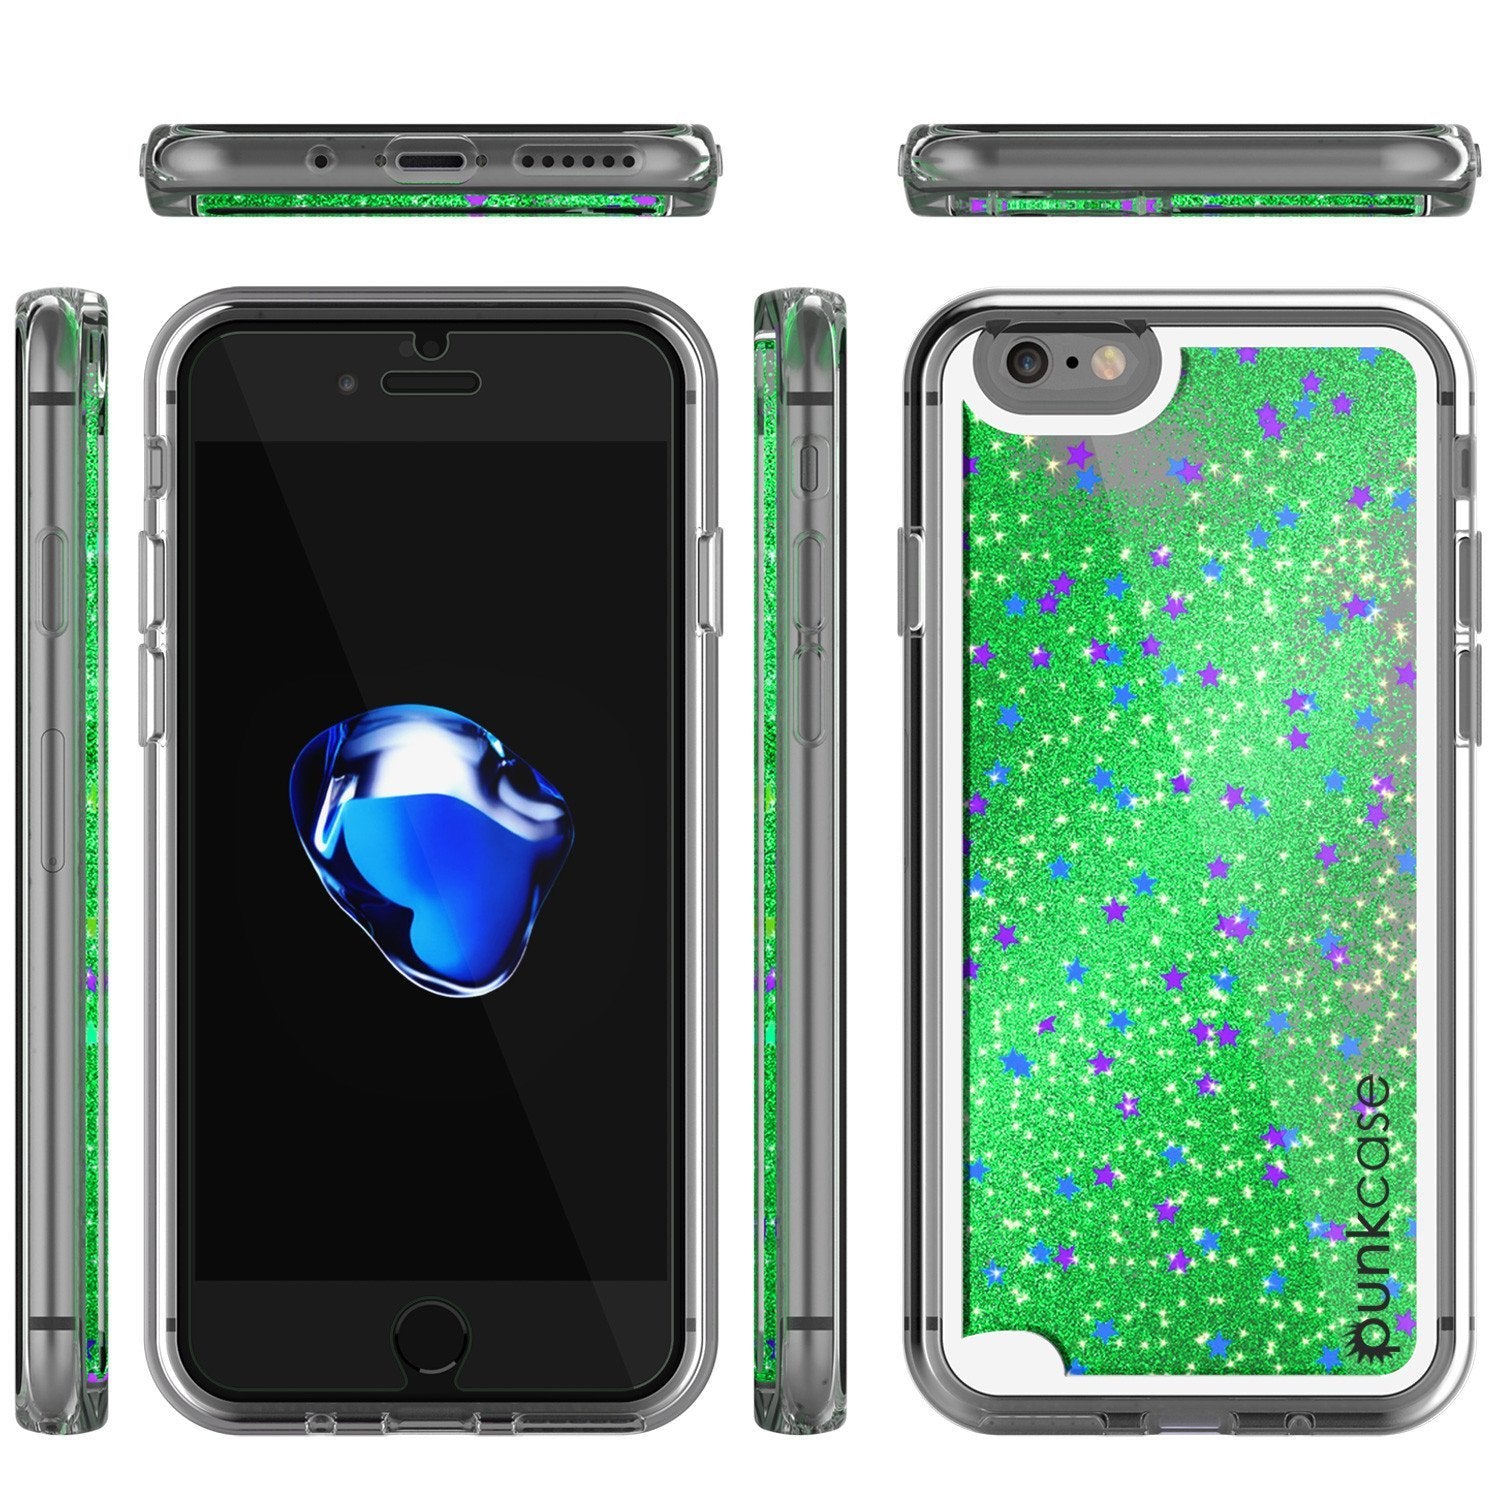 iPhone 8 Case, PunkCase LIQUID Green Series, Protective Dual Layer Floating Glitter Cover - PunkCase NZ